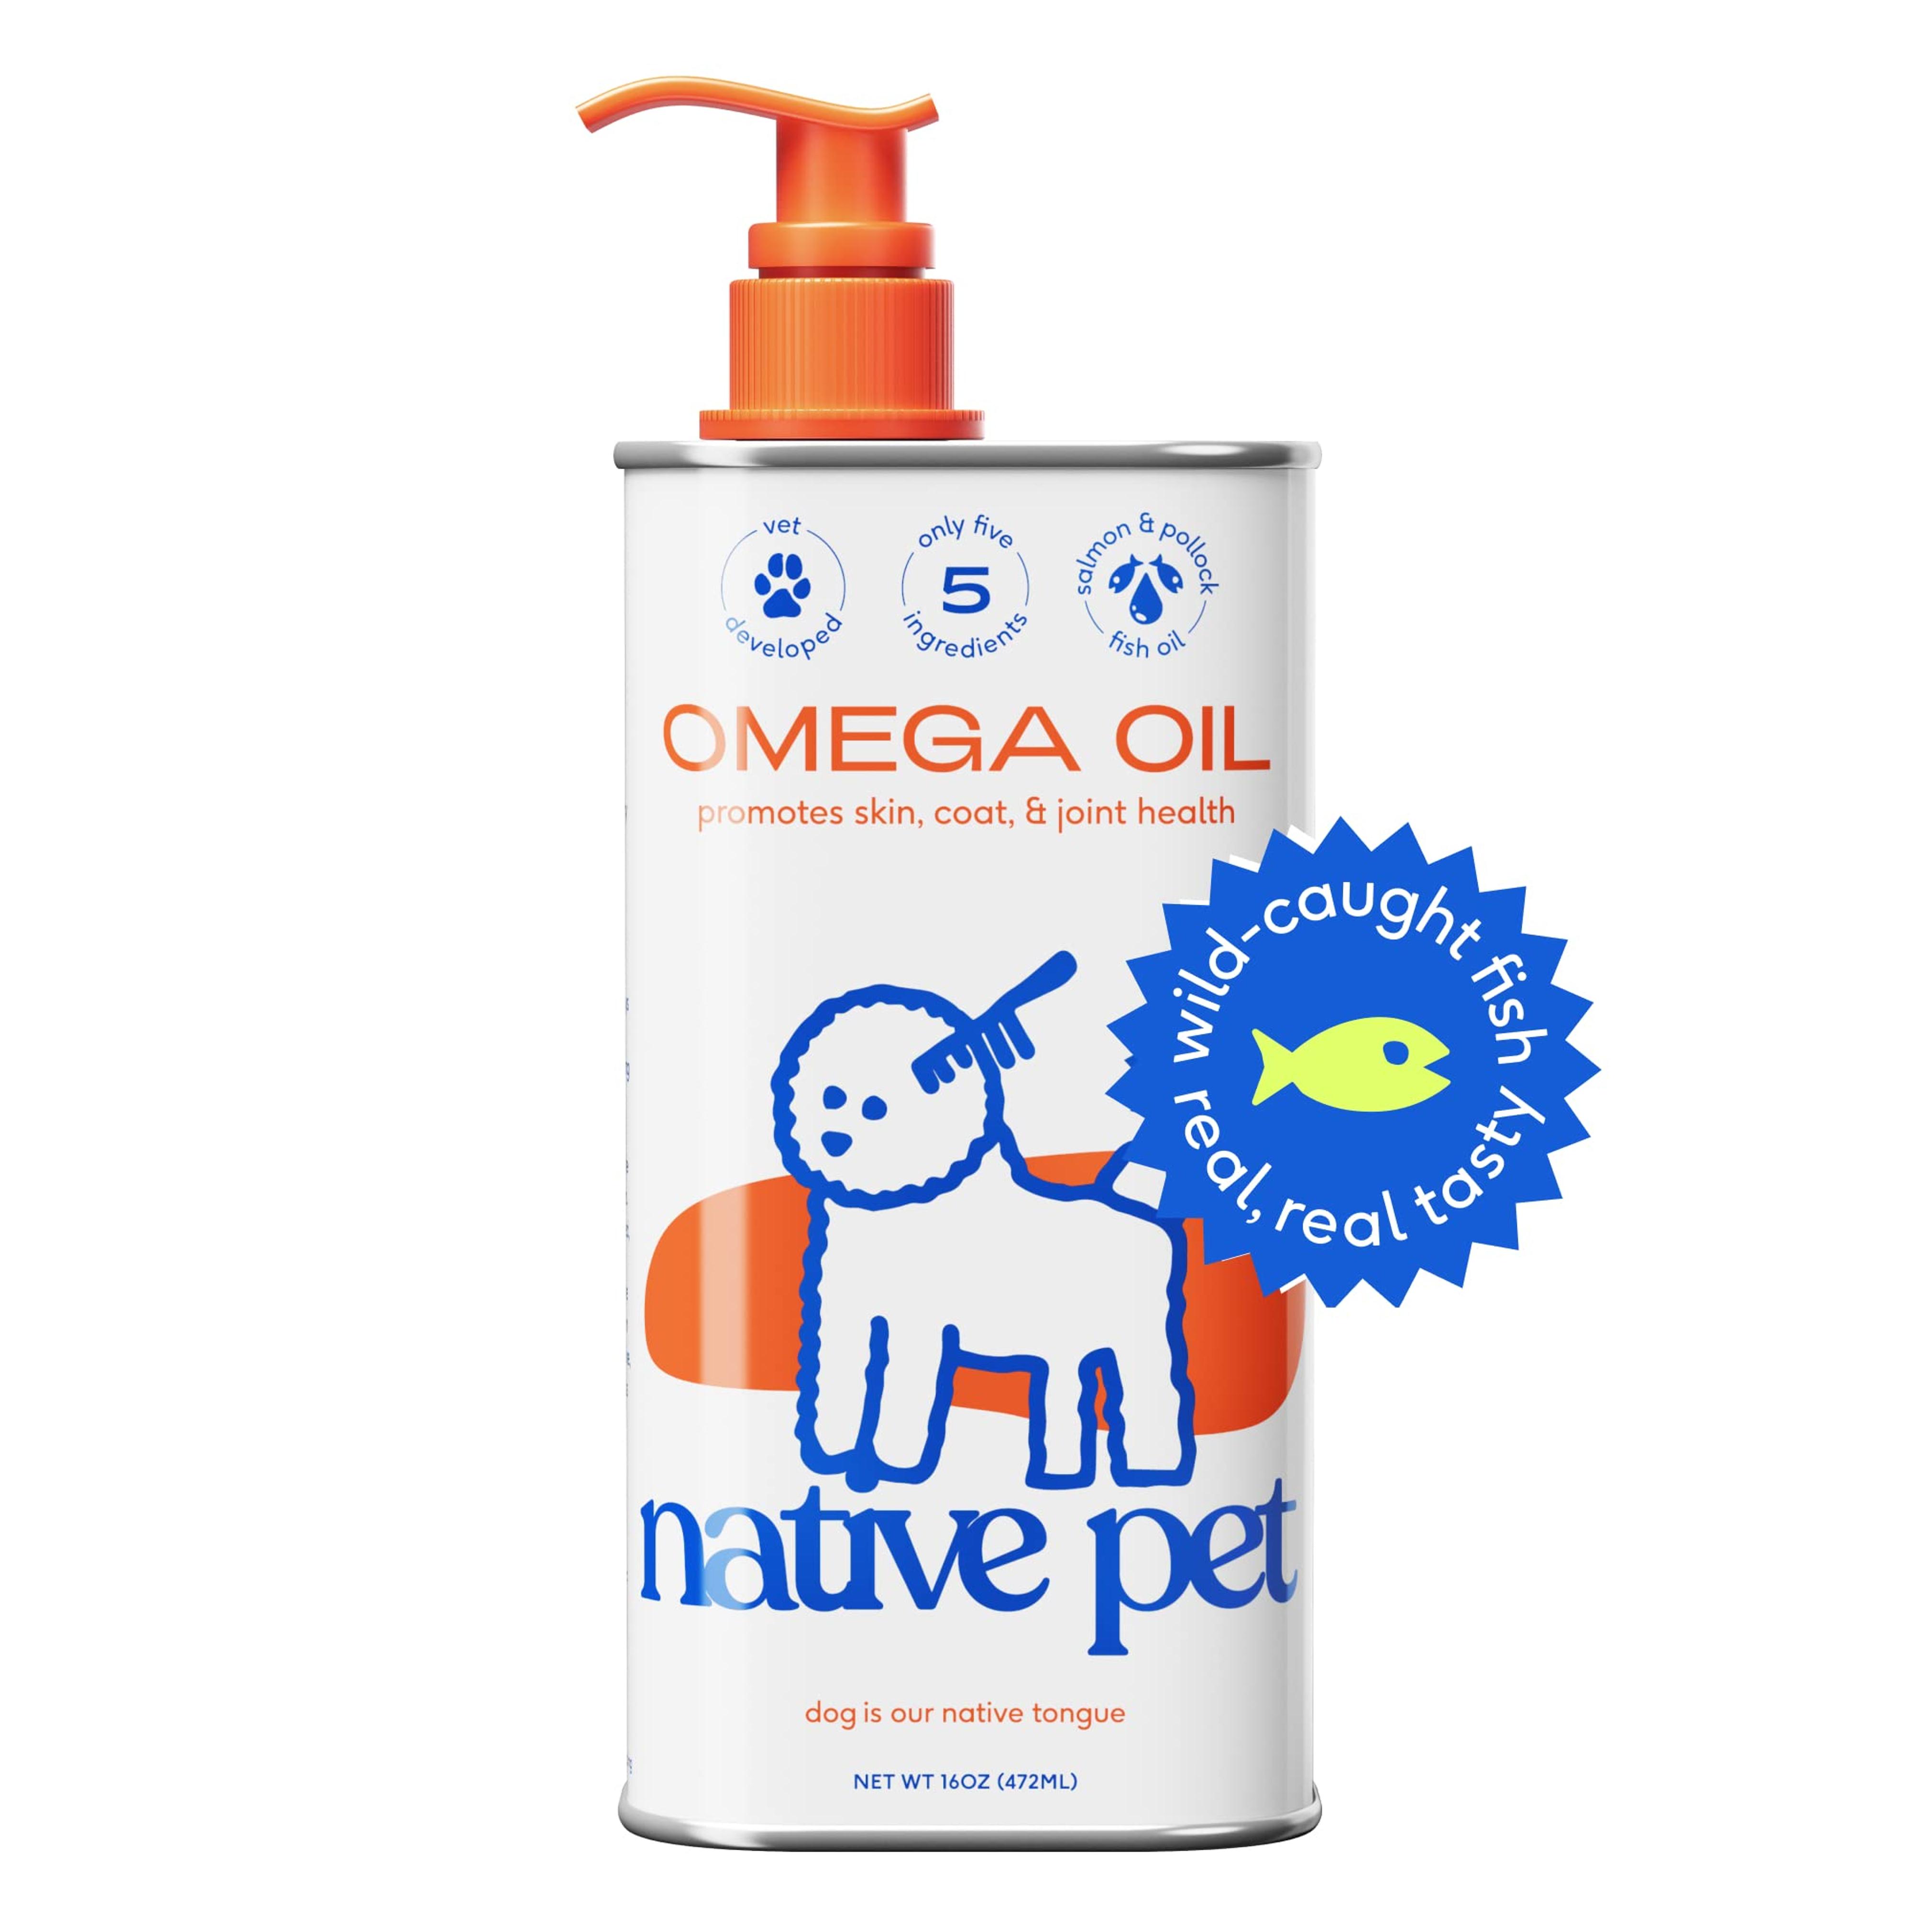 Native Pet Omega 3 Fish Oil Supplements with Omega 3 EPA DHA for Dogs Liquid Pump is Easy to Serve, Supports Itchy Skin + Mobility - a Fish Oil Dogs Love! (16 oz)